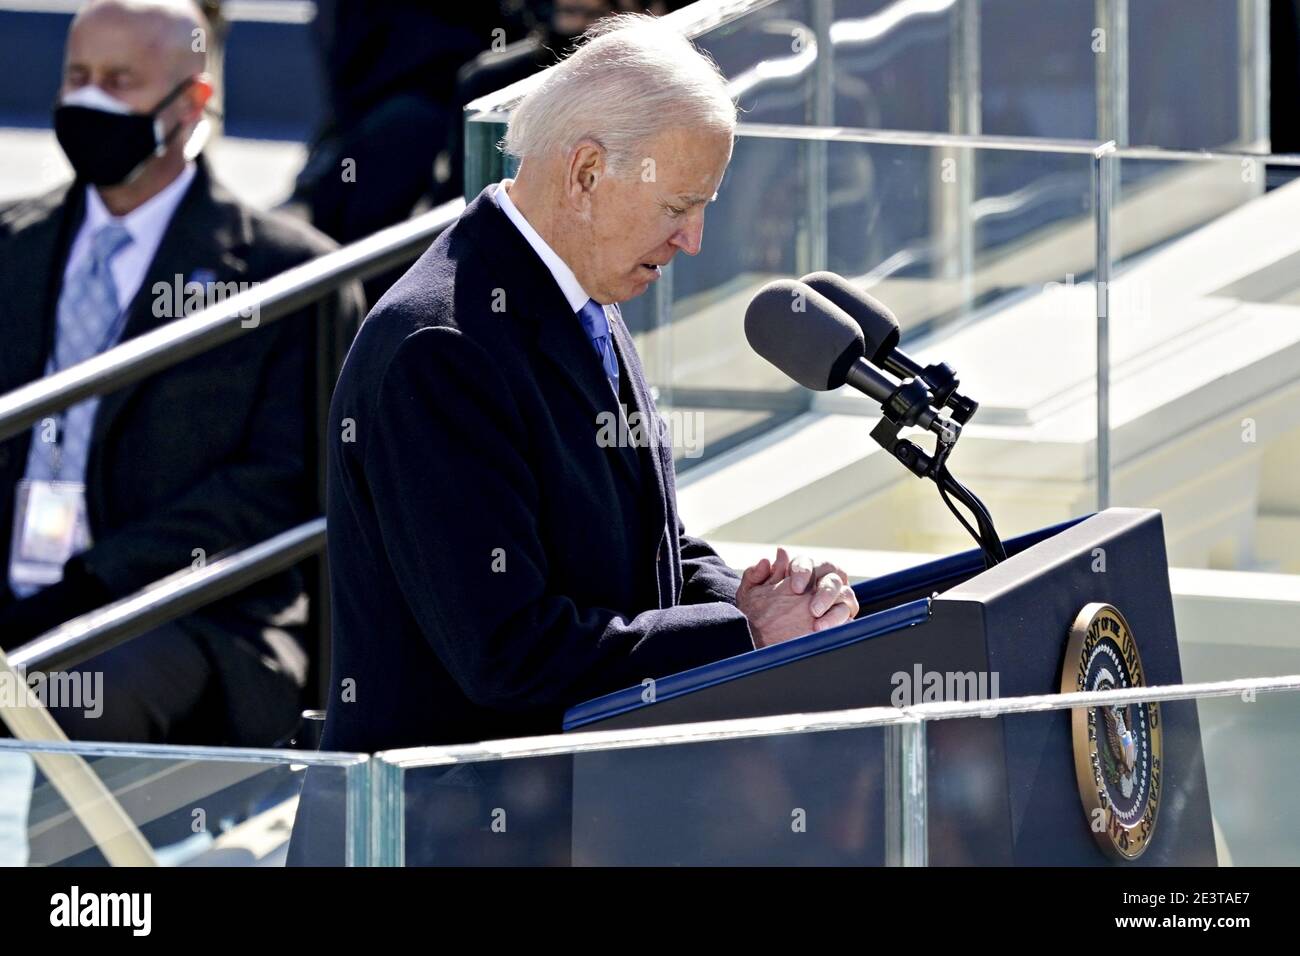 Washington, United States. 20th Jan, 2021. U.S. President Joe Biden, right, speaks during the 59th presidential inauguration in Washington, DC, U.S., on Wednesday, Jan. 20, 2021. Biden will propose a broad immigration overhaul on his first day as president, including a shortened pathway to U.S. citizenship for undocumented migrants - a complete reversal from Donald Trump's immigration restrictions and crackdowns, but one that faces major roadblocks in Congress. Photo by Kevin Dietsch/UPI Credit: UPI/Alamy Live News Stock Photo